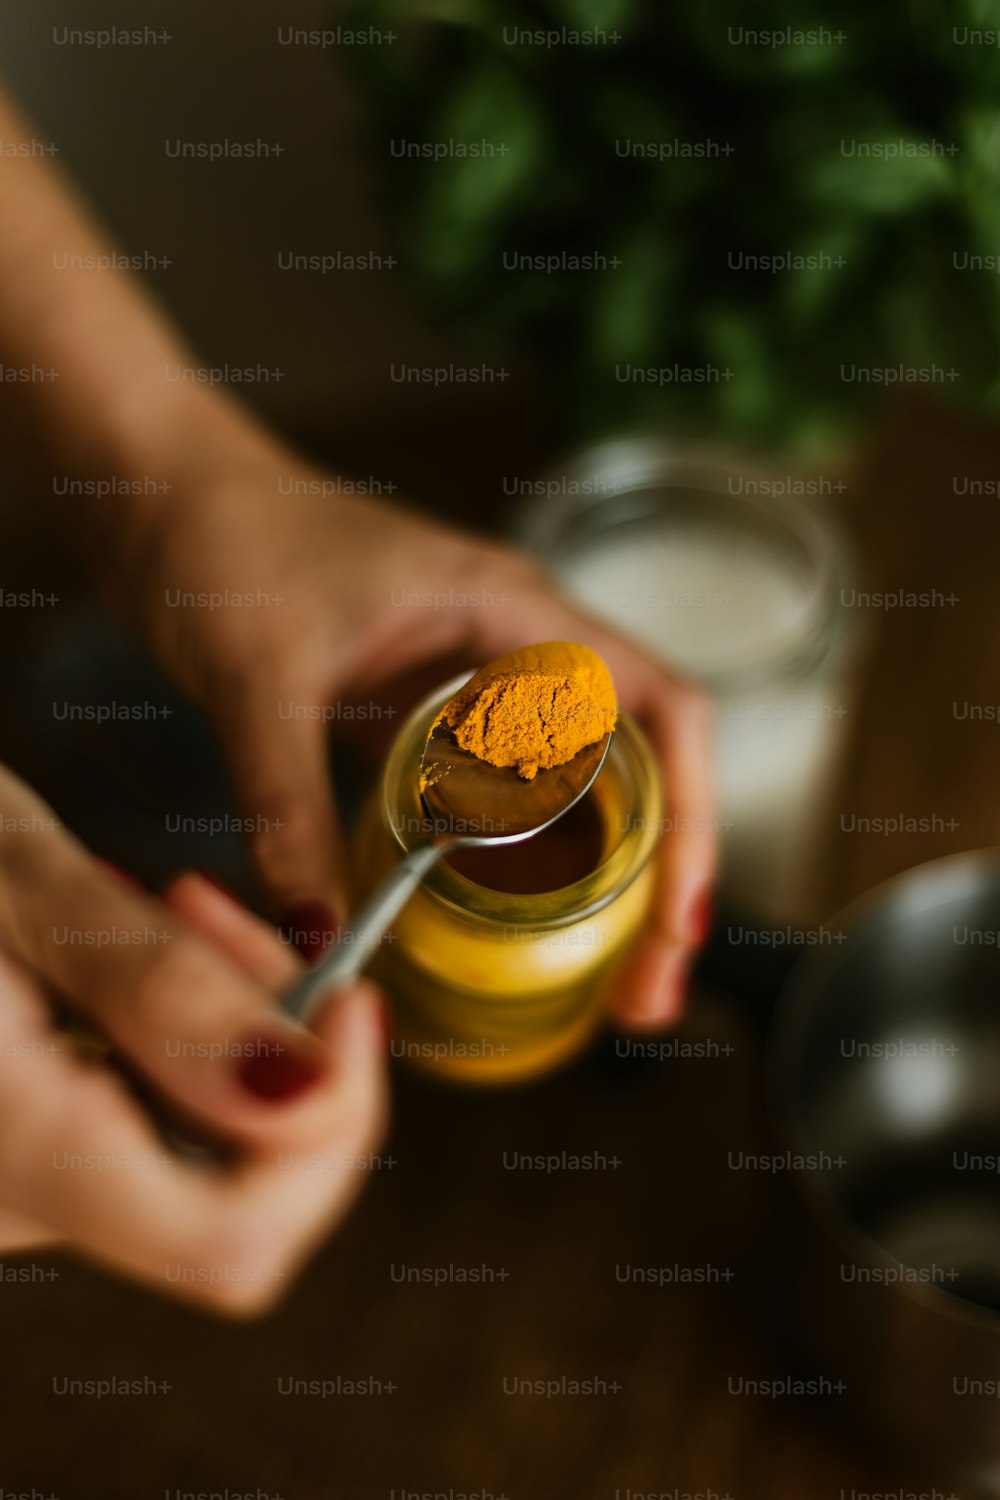 a person holding a spoon over a jar of mustard